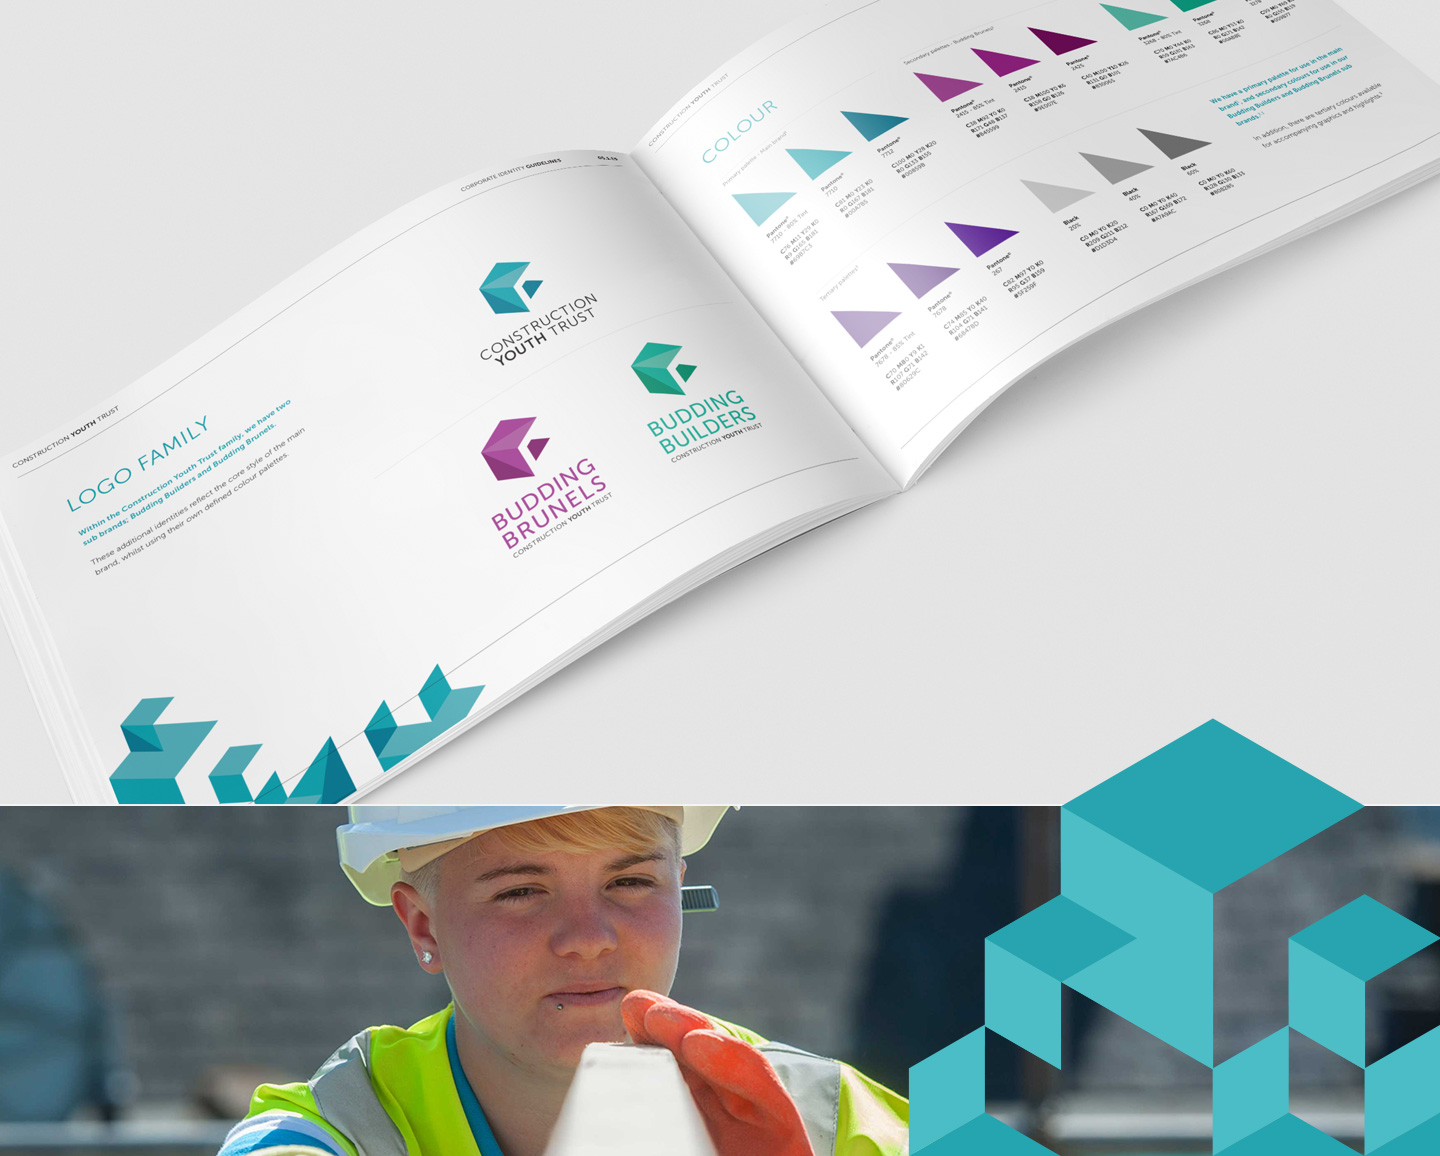 CONSTRUCTION YOUTH TRUST, brand refresh